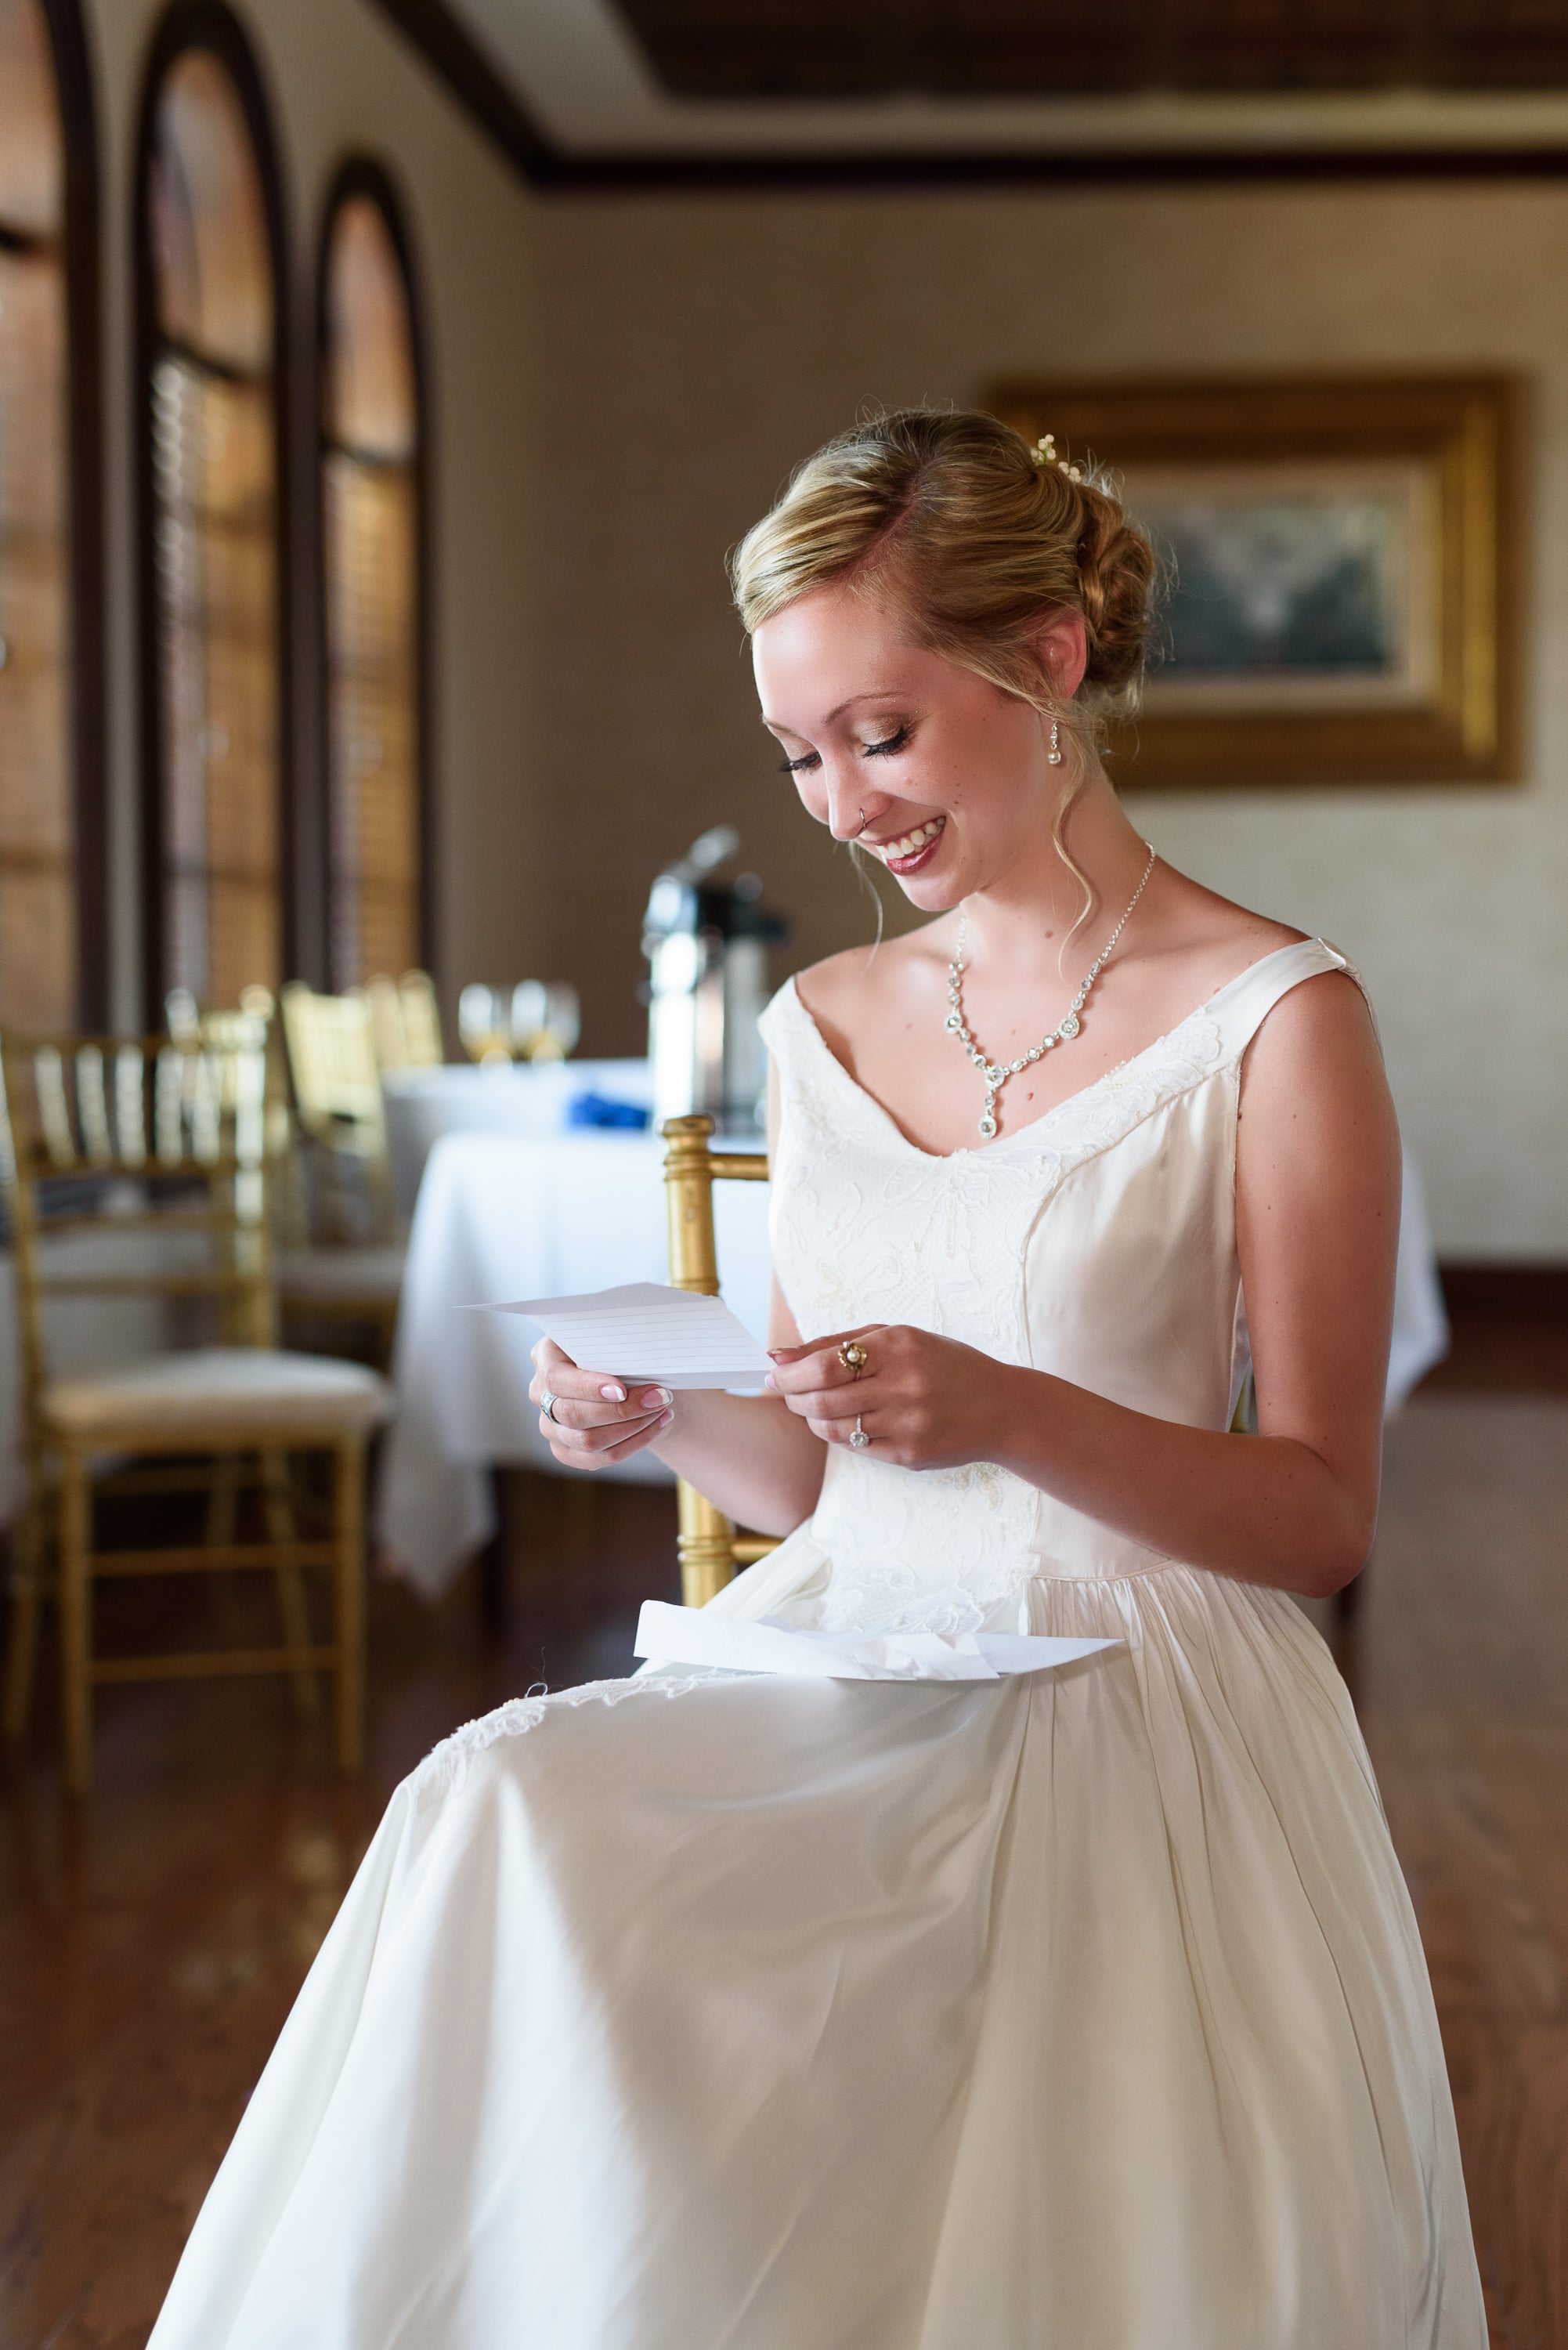 Bride reading a letter from her groom before the ceremony -  Grande Dunes Ocean Club